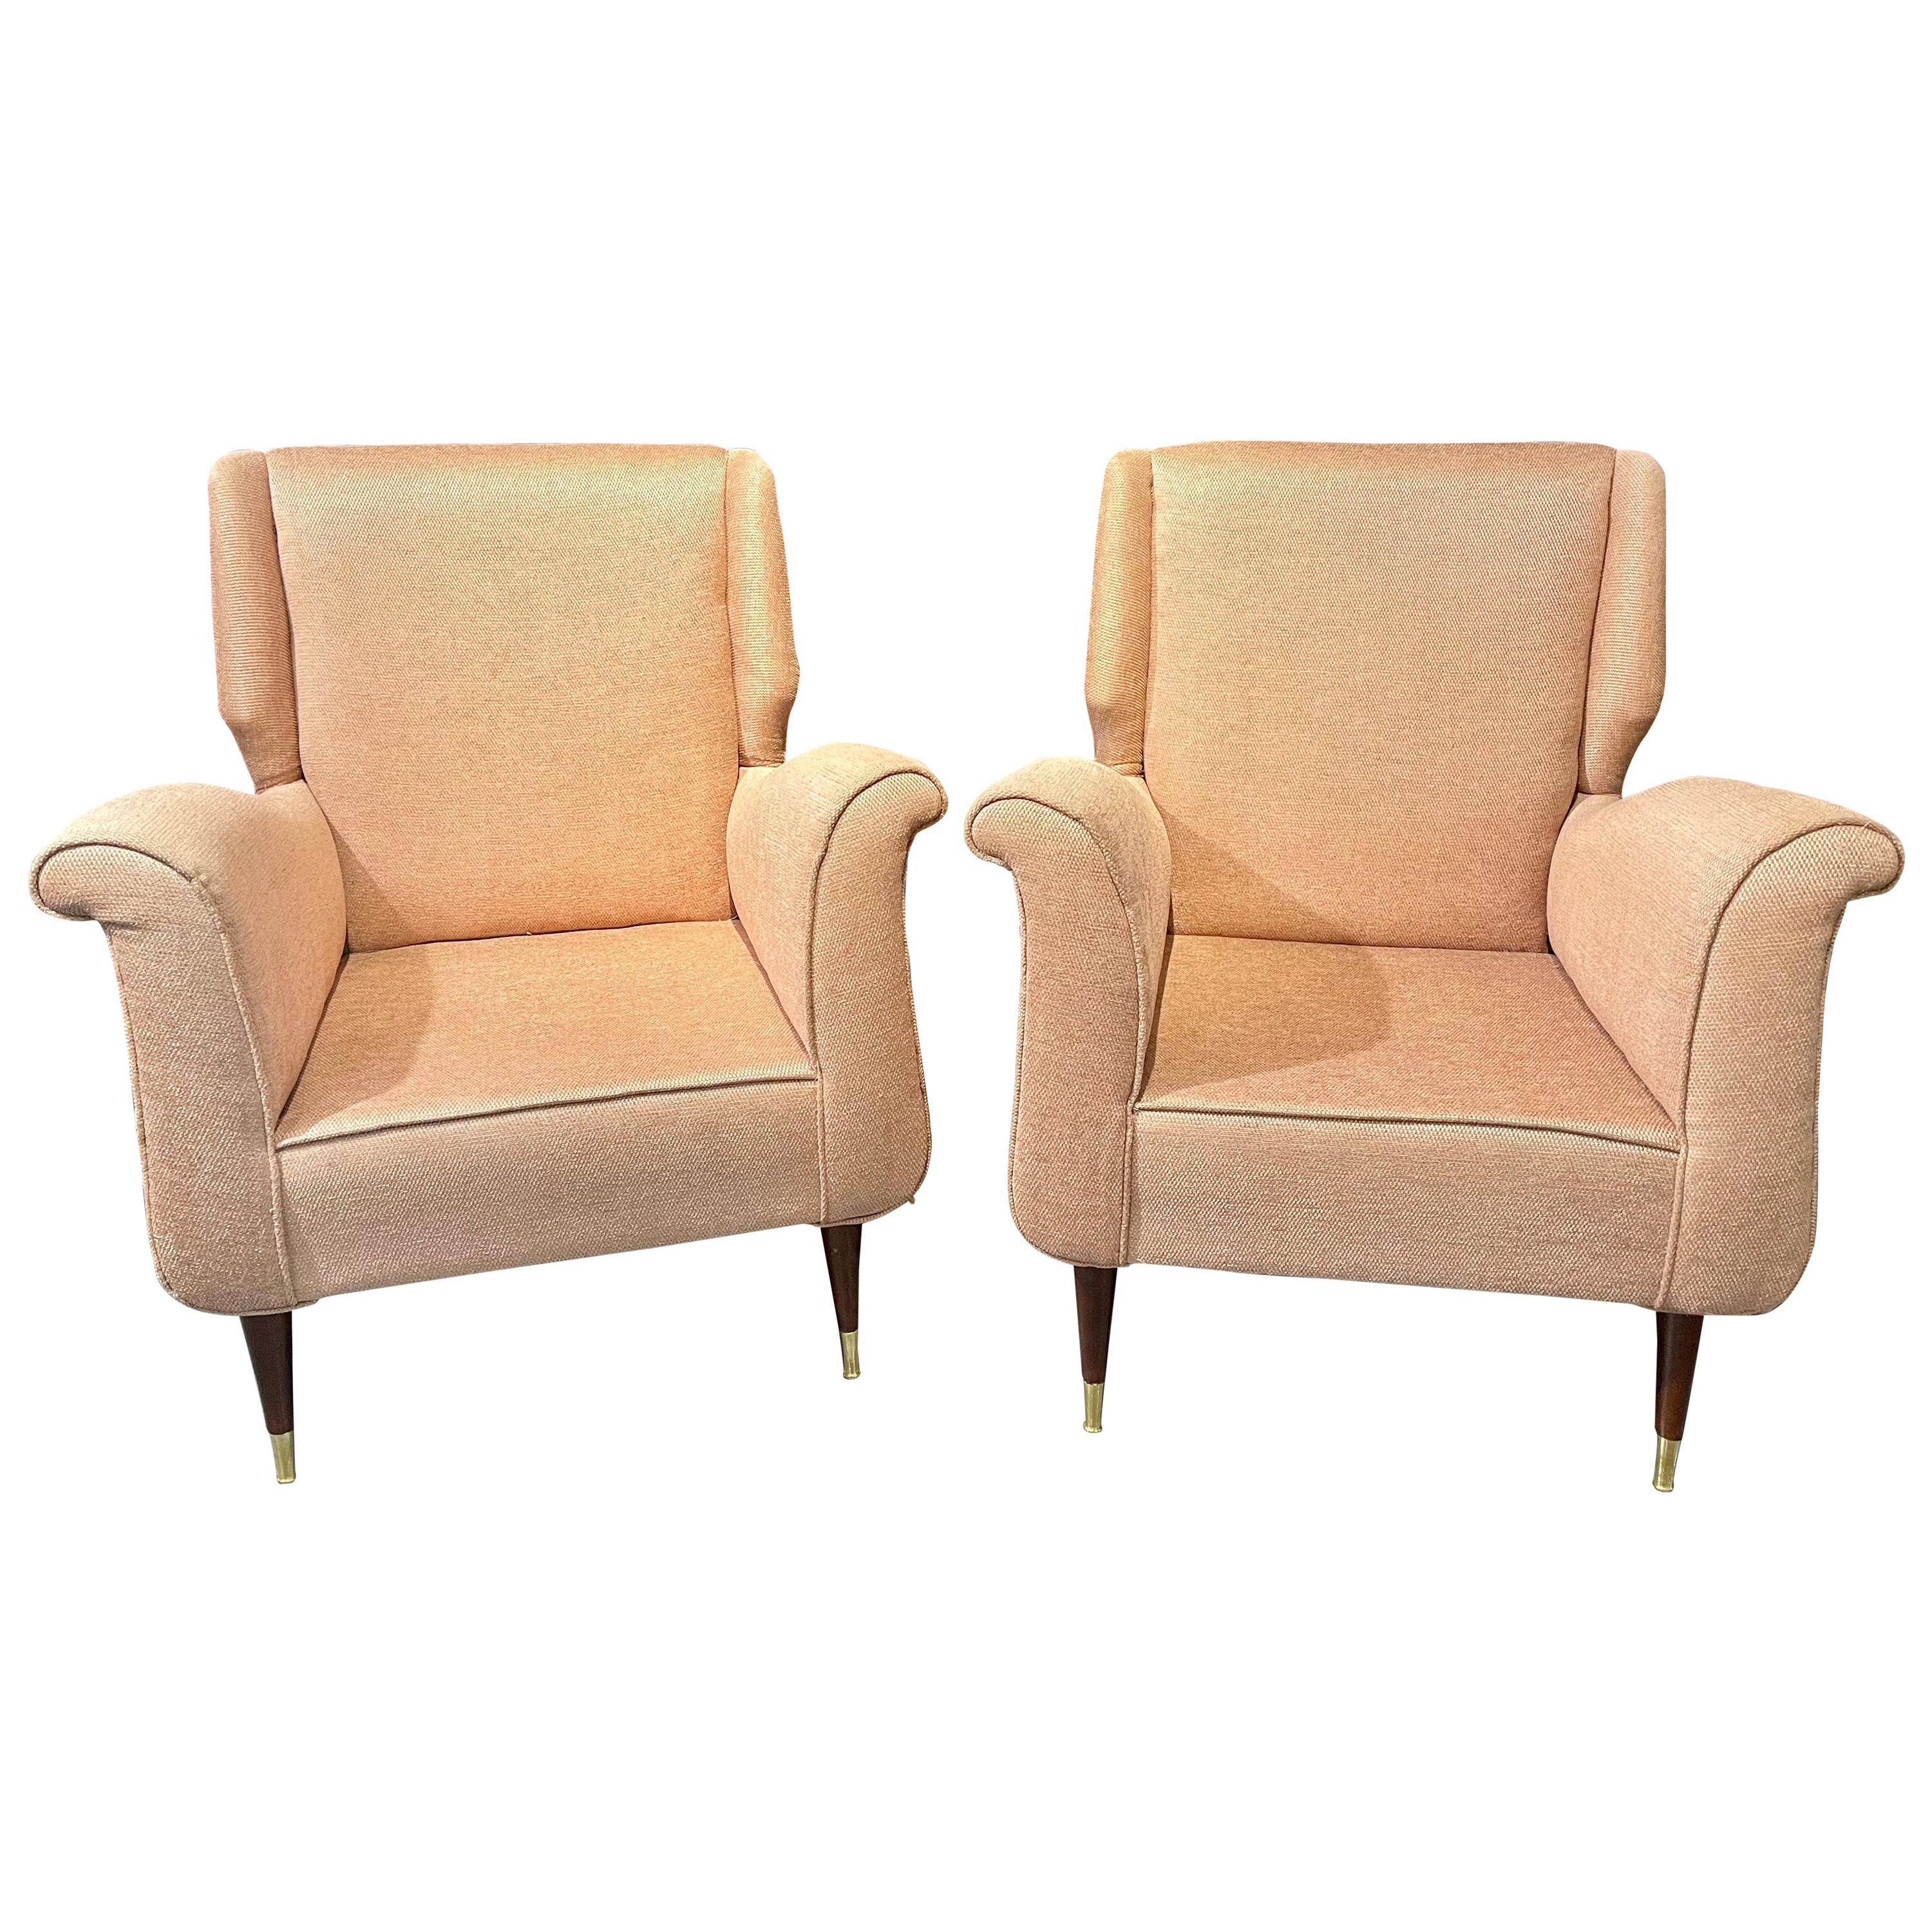 Pair of Mid-Century Modern Gio Ponti Style Armchairs / Wingback Chairs